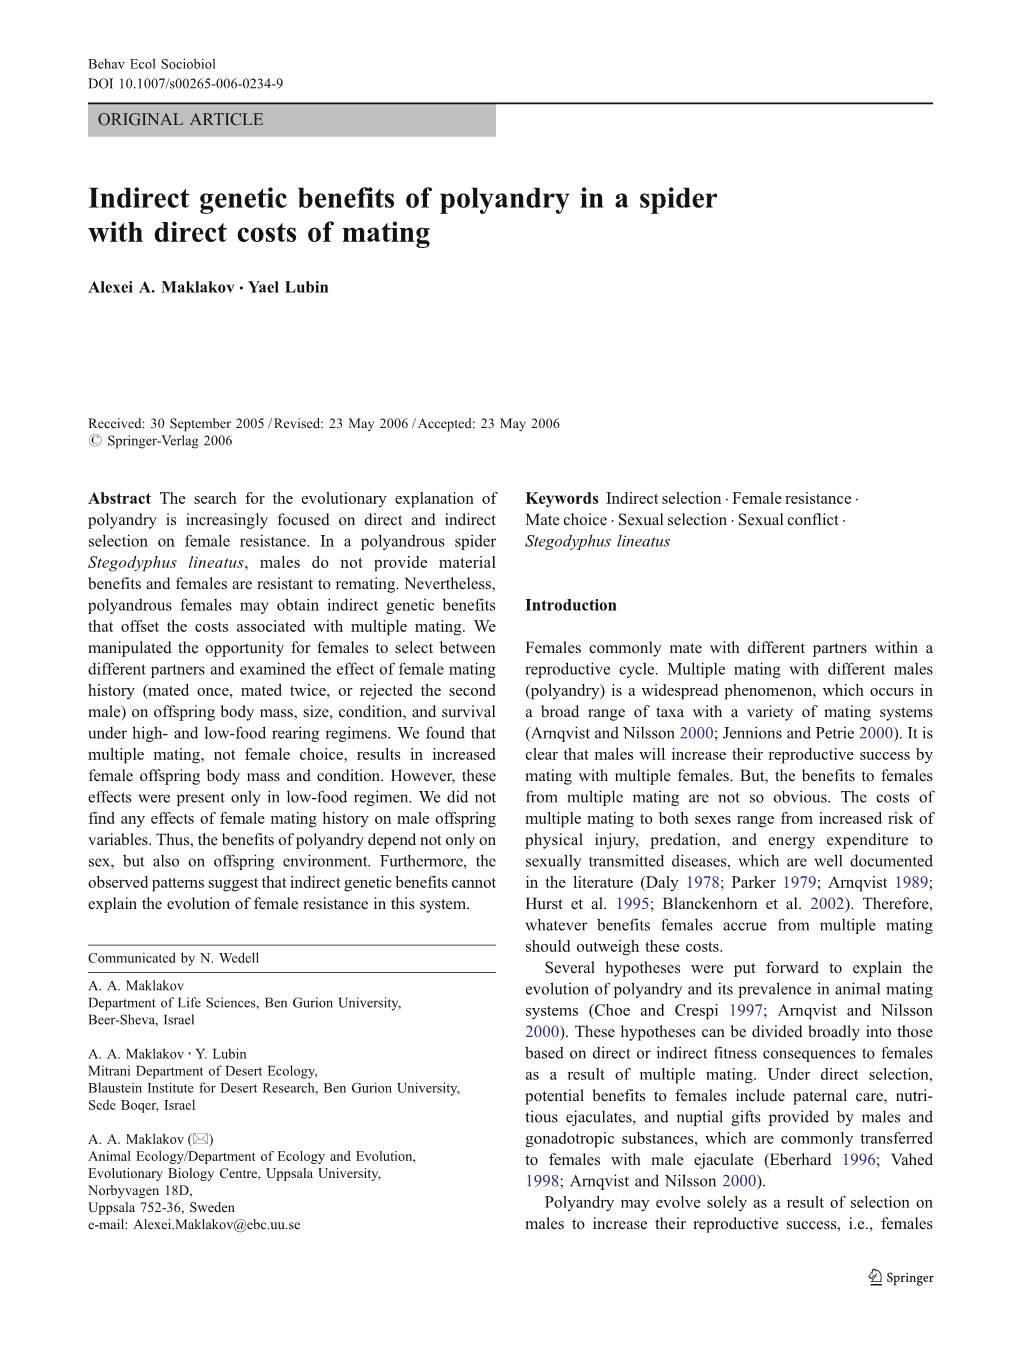 Indirect Genetic Benefits of Polyandry in a Spider with Direct Costs of Mating